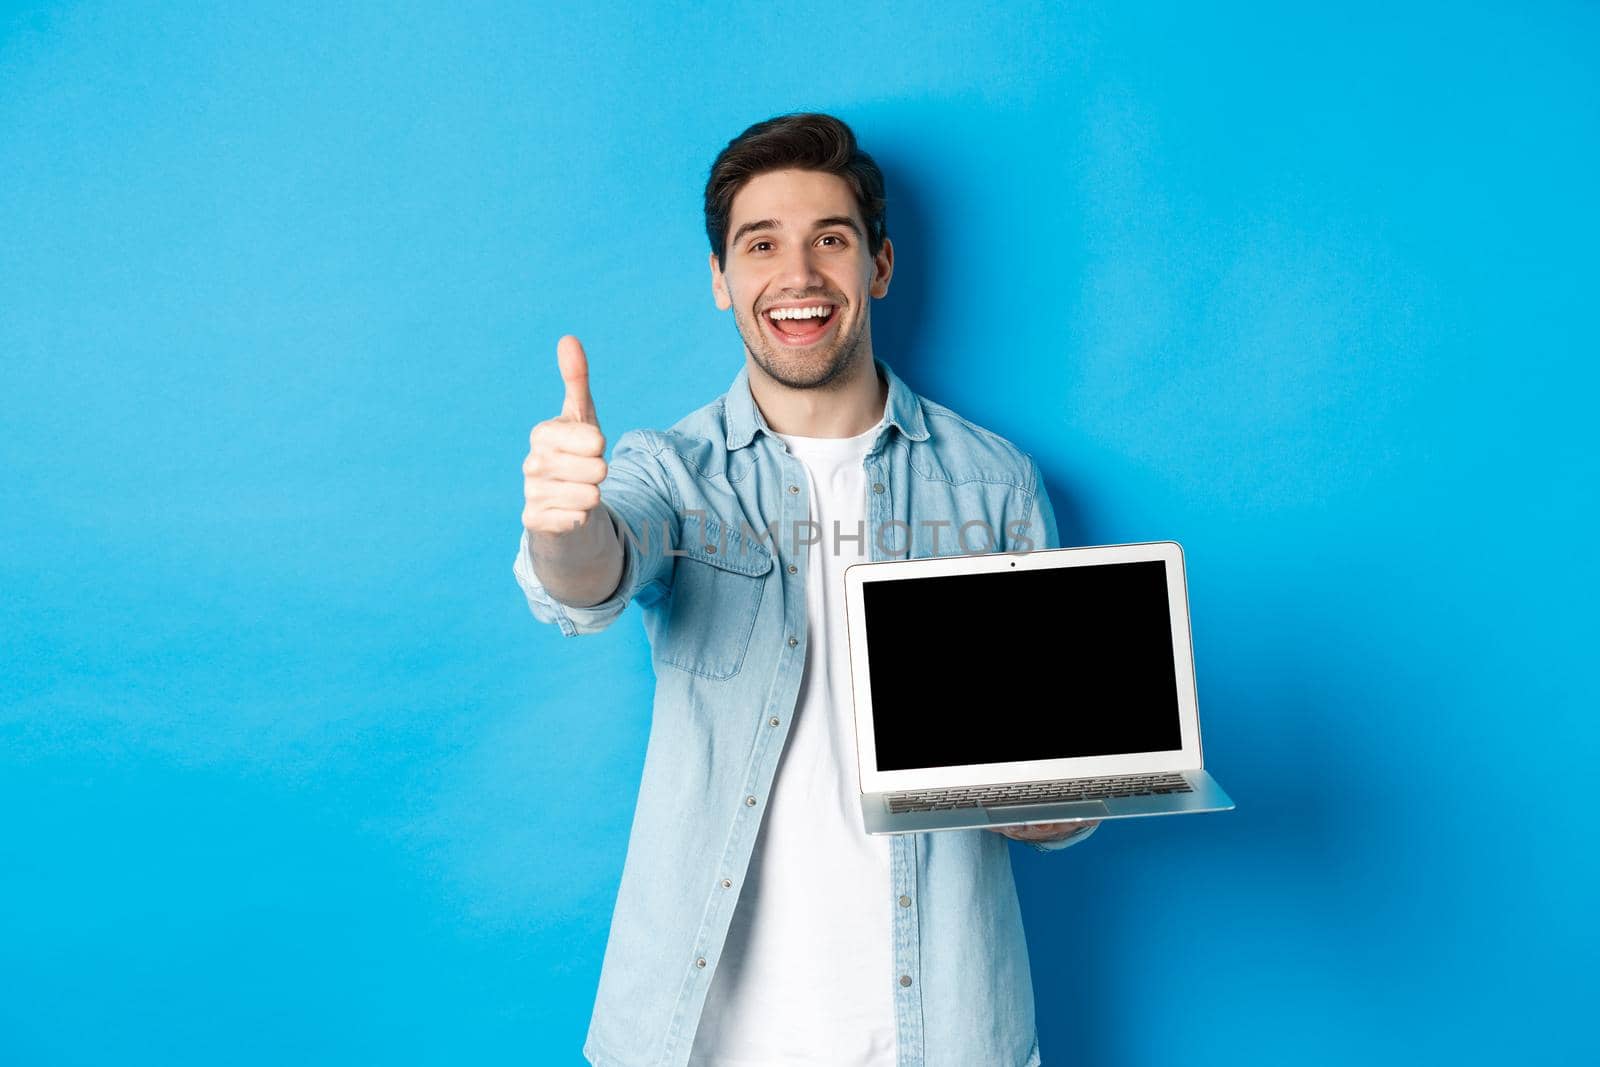 Image of satisfied handsome man showing laptop screen, thumbs-up in approval, like website or internet, standing over blue background.